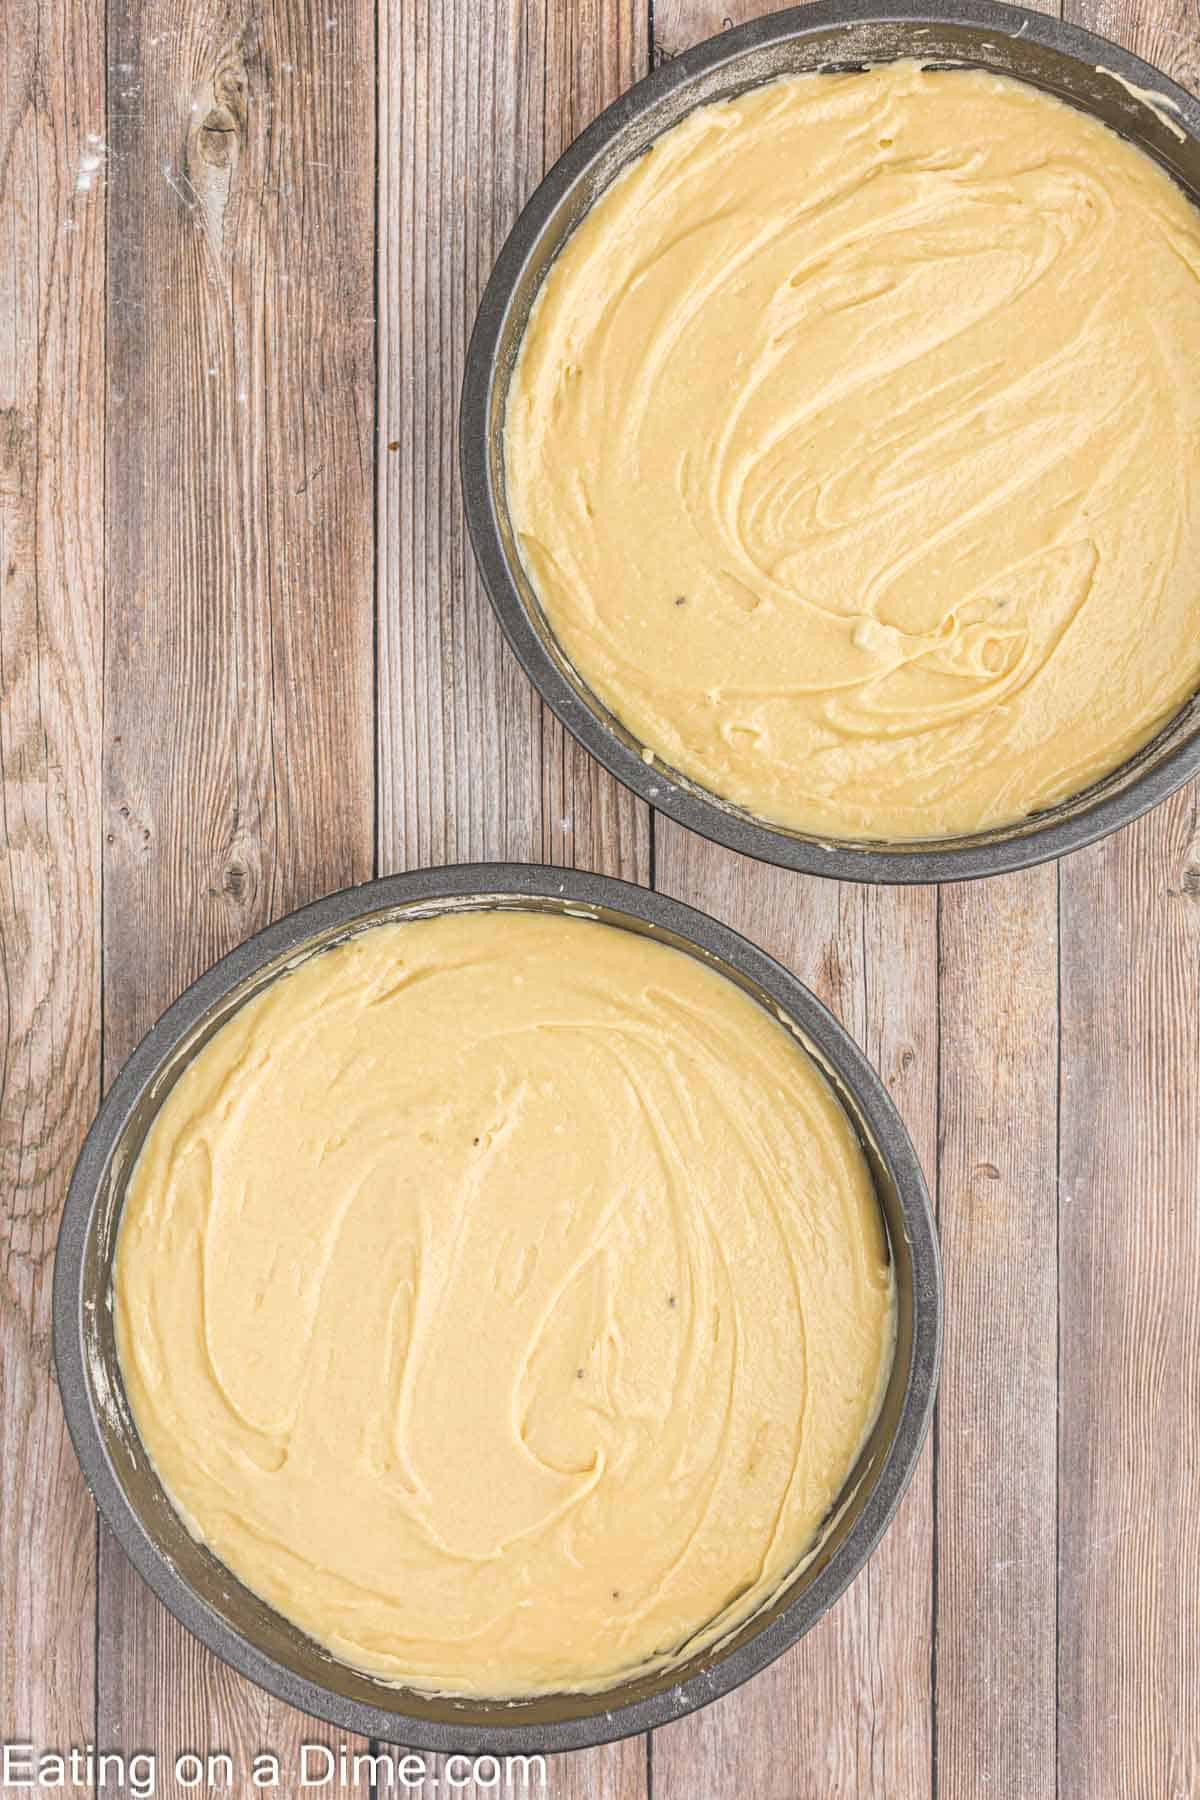 Pour cake batter into two round cake pans